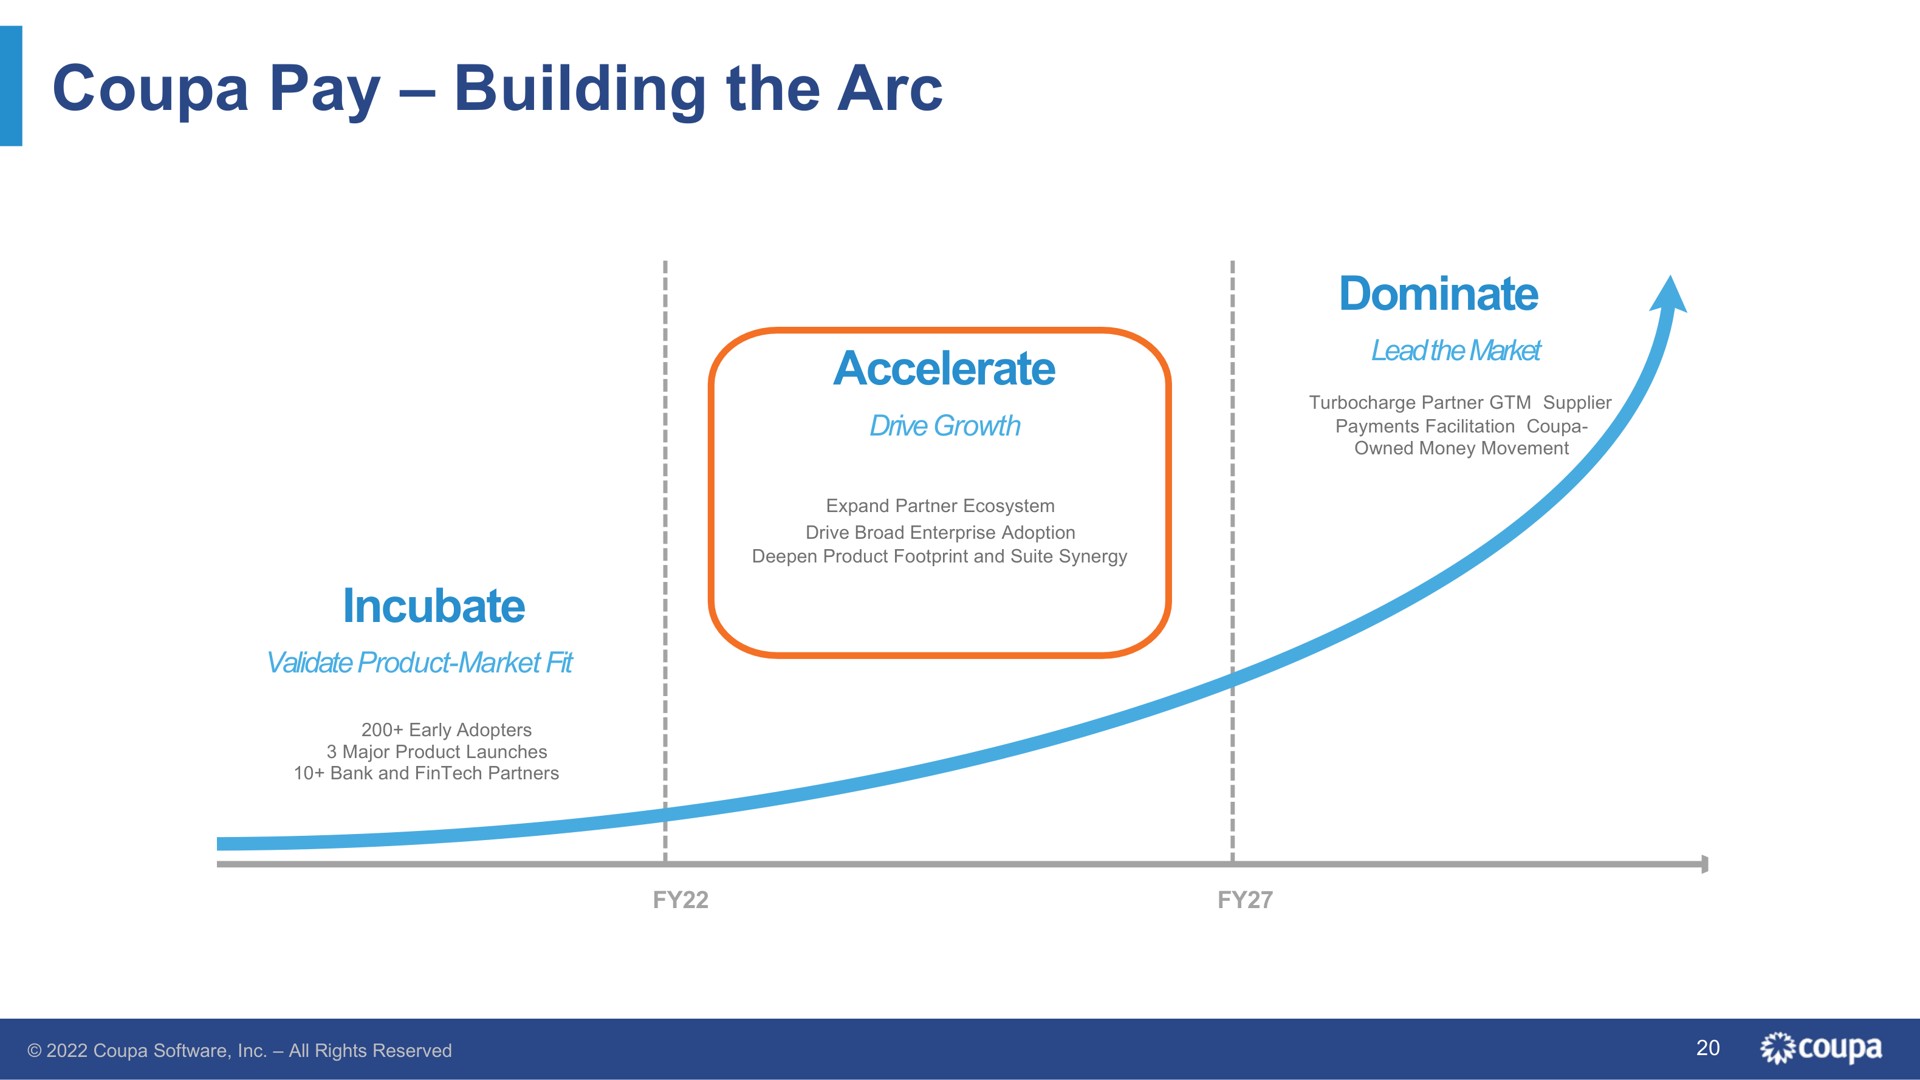 pay building the arc accelerate incubate dominate | Coupa